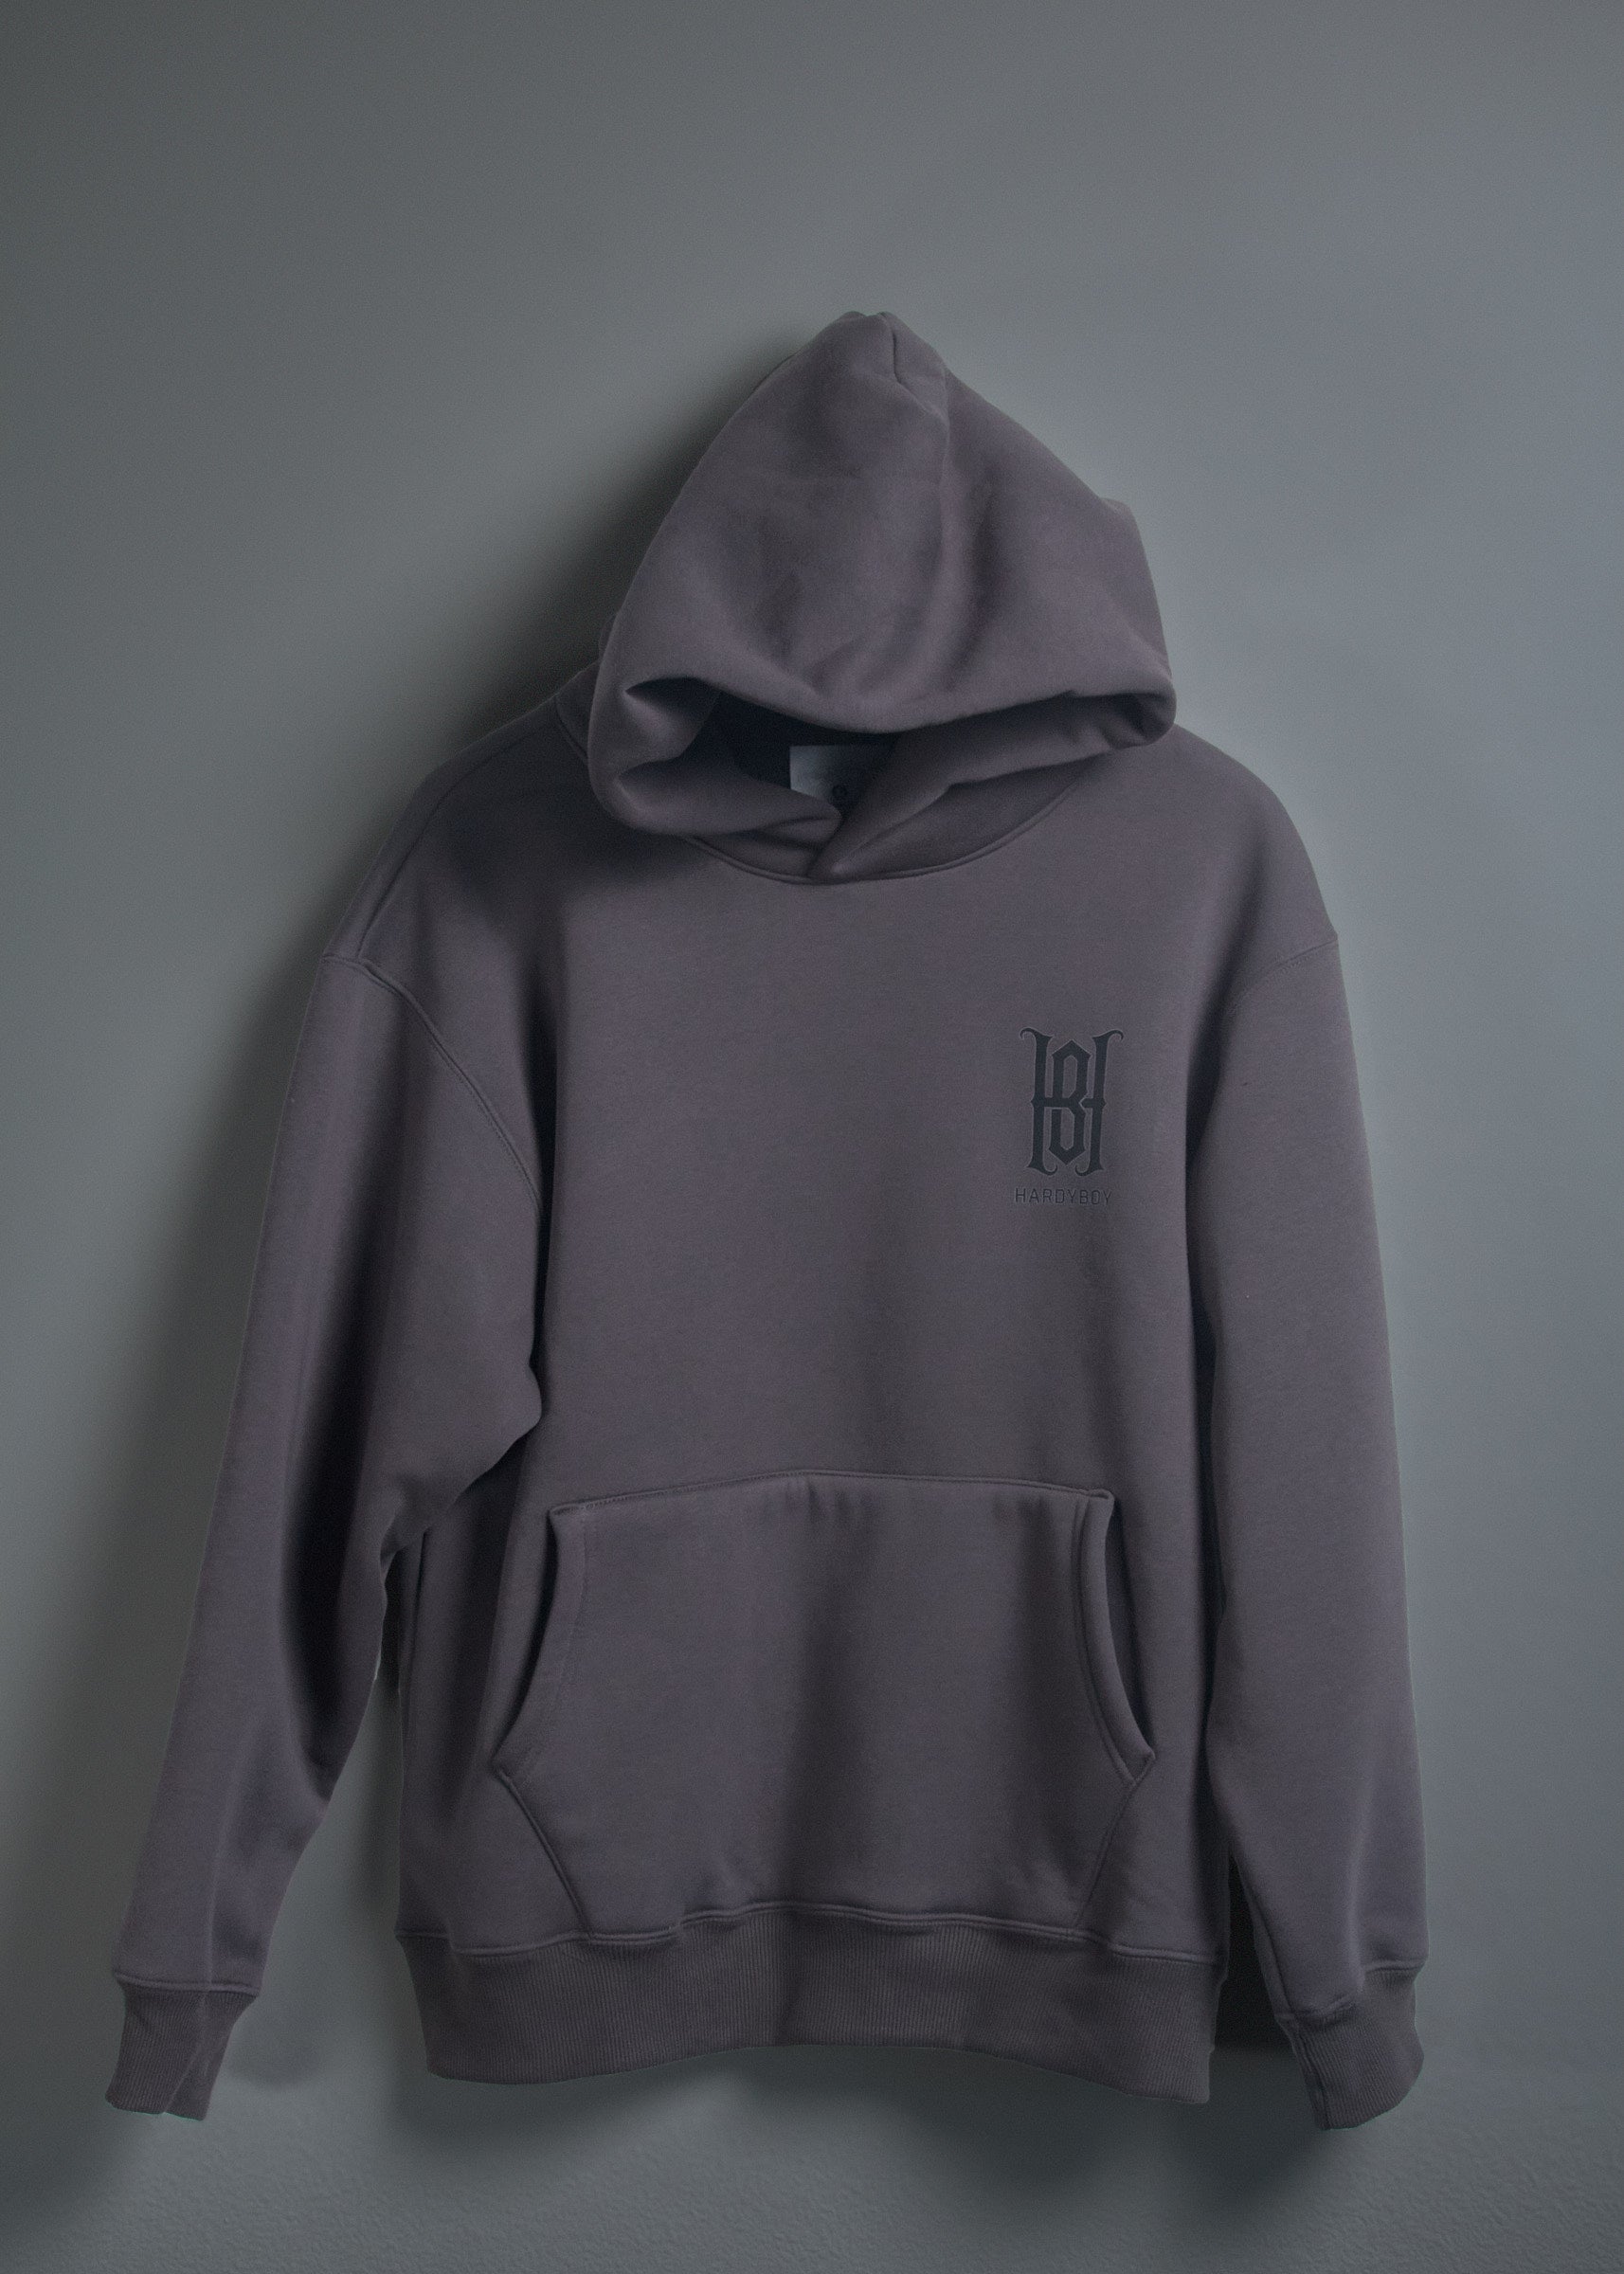 Carbon grey hoodie with Hardyboy monologo on left chest (front)